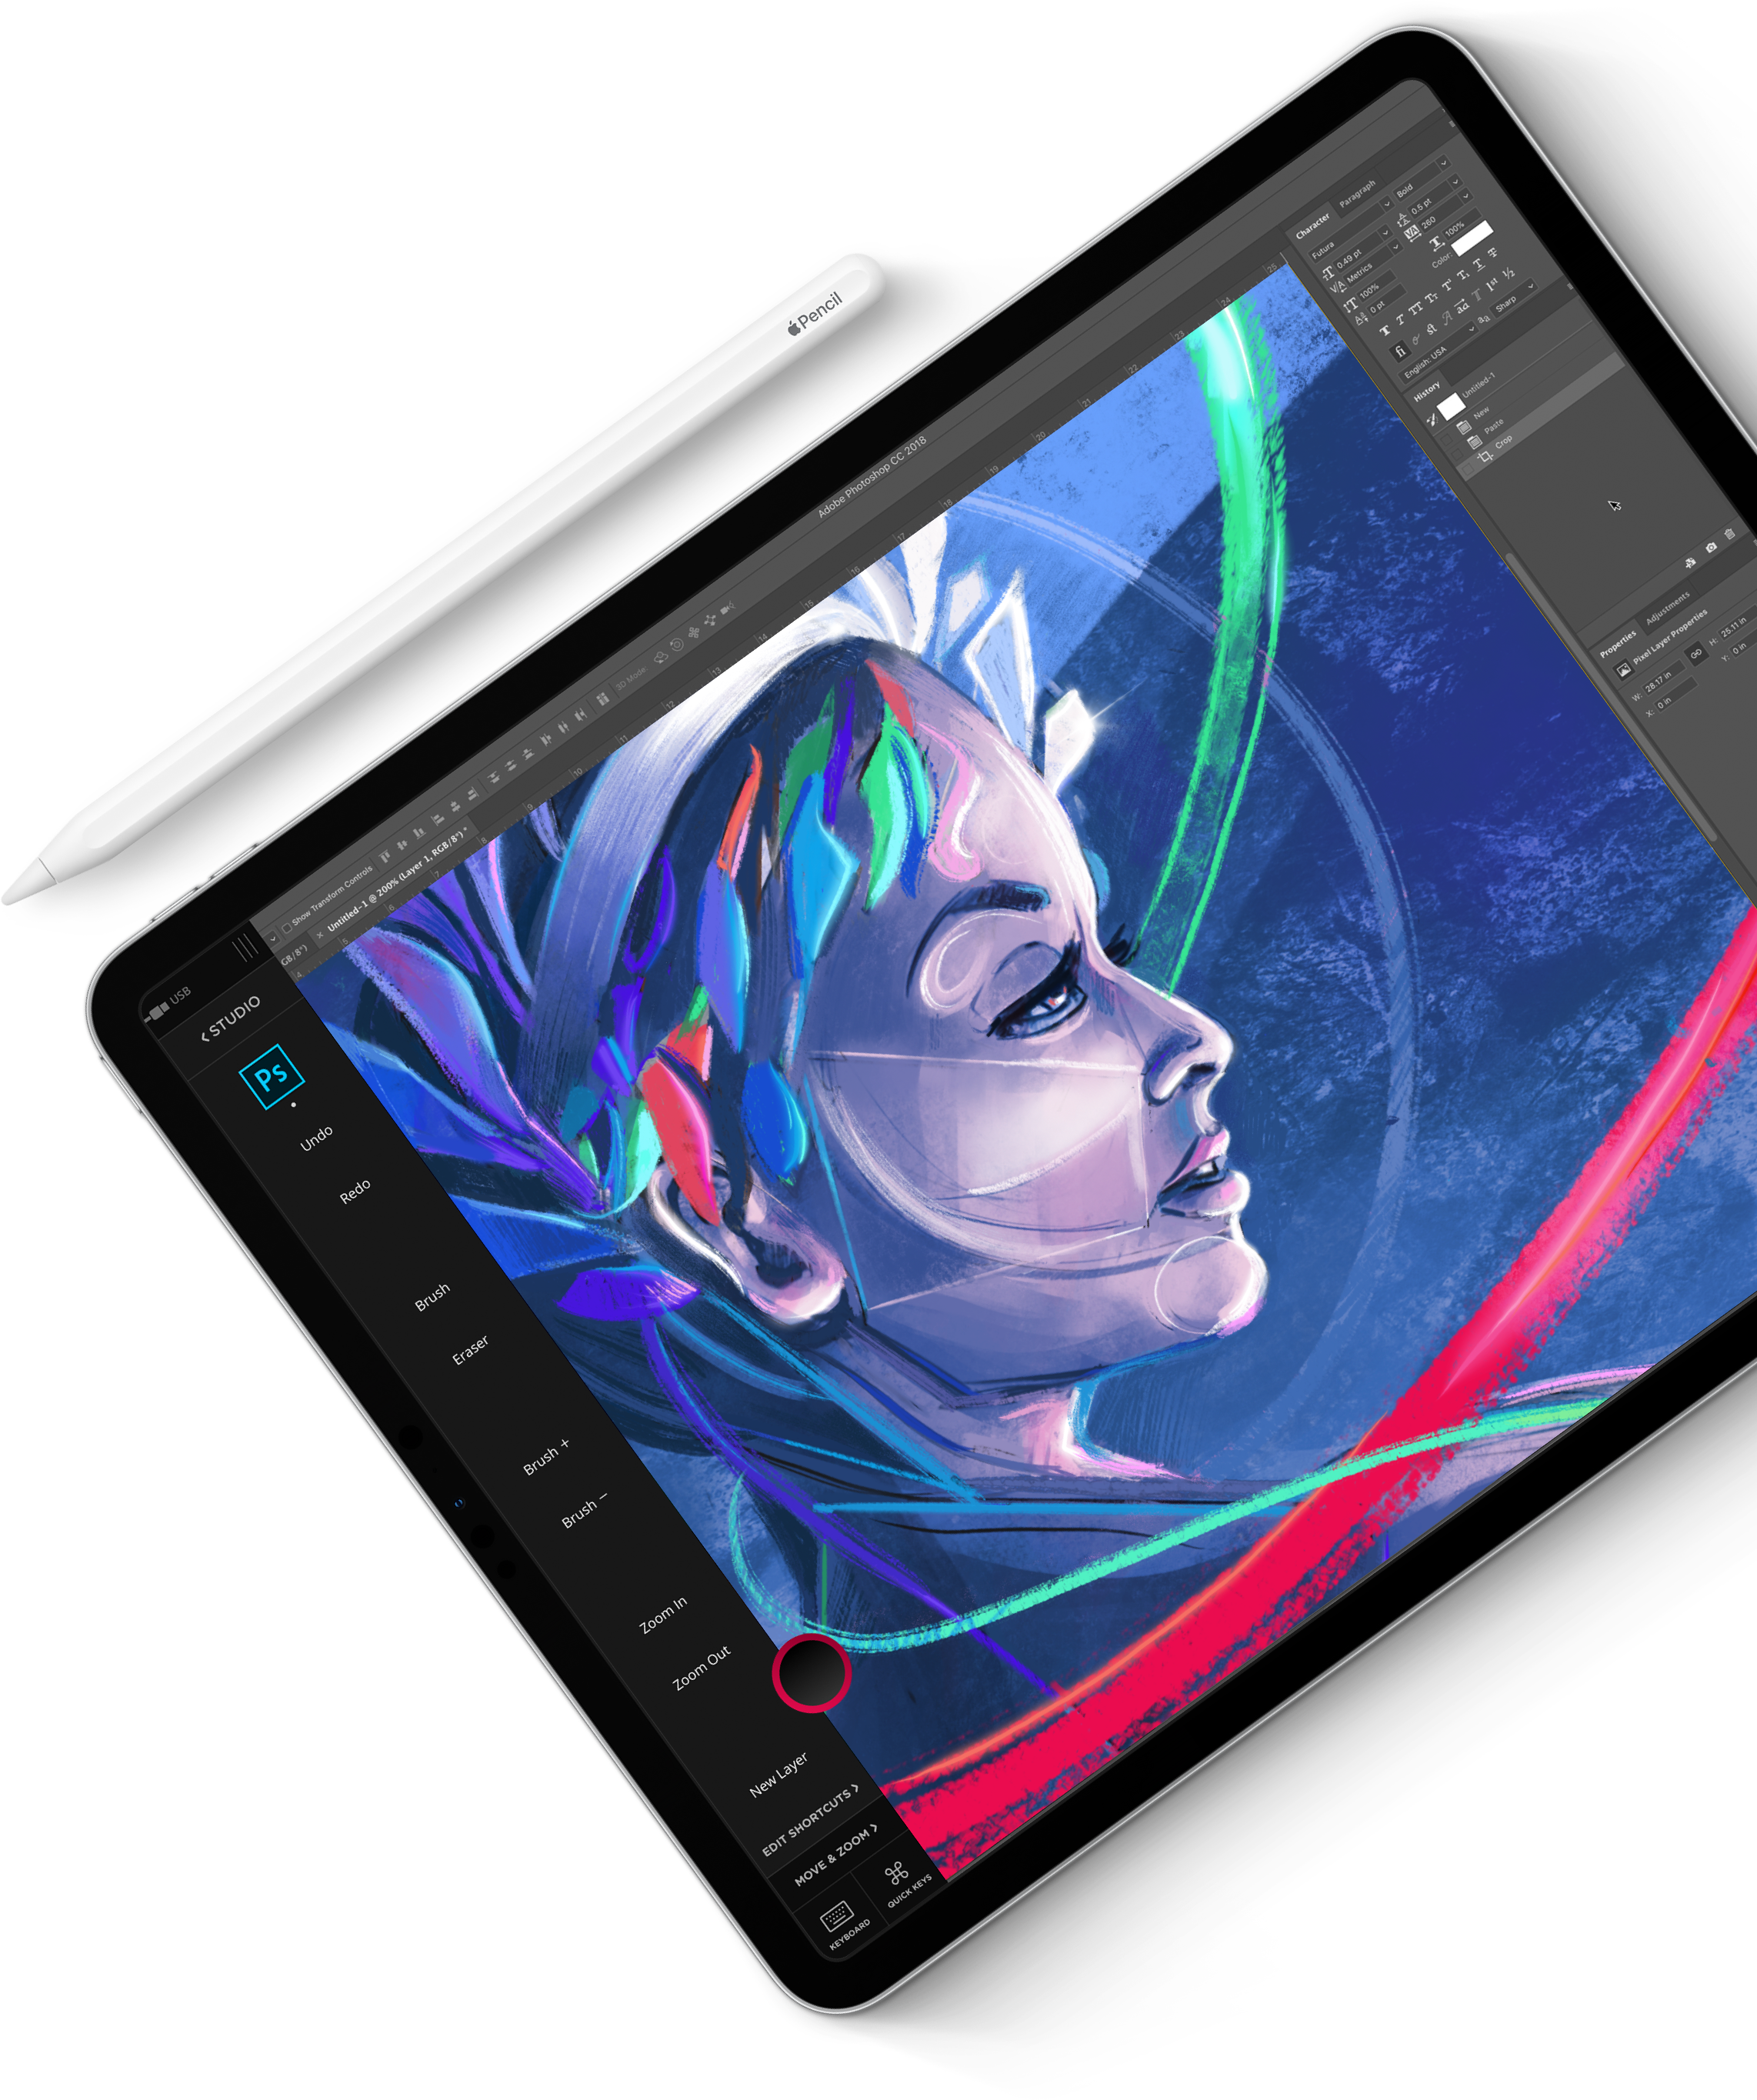 A digital painting of a woman's face on a tablet